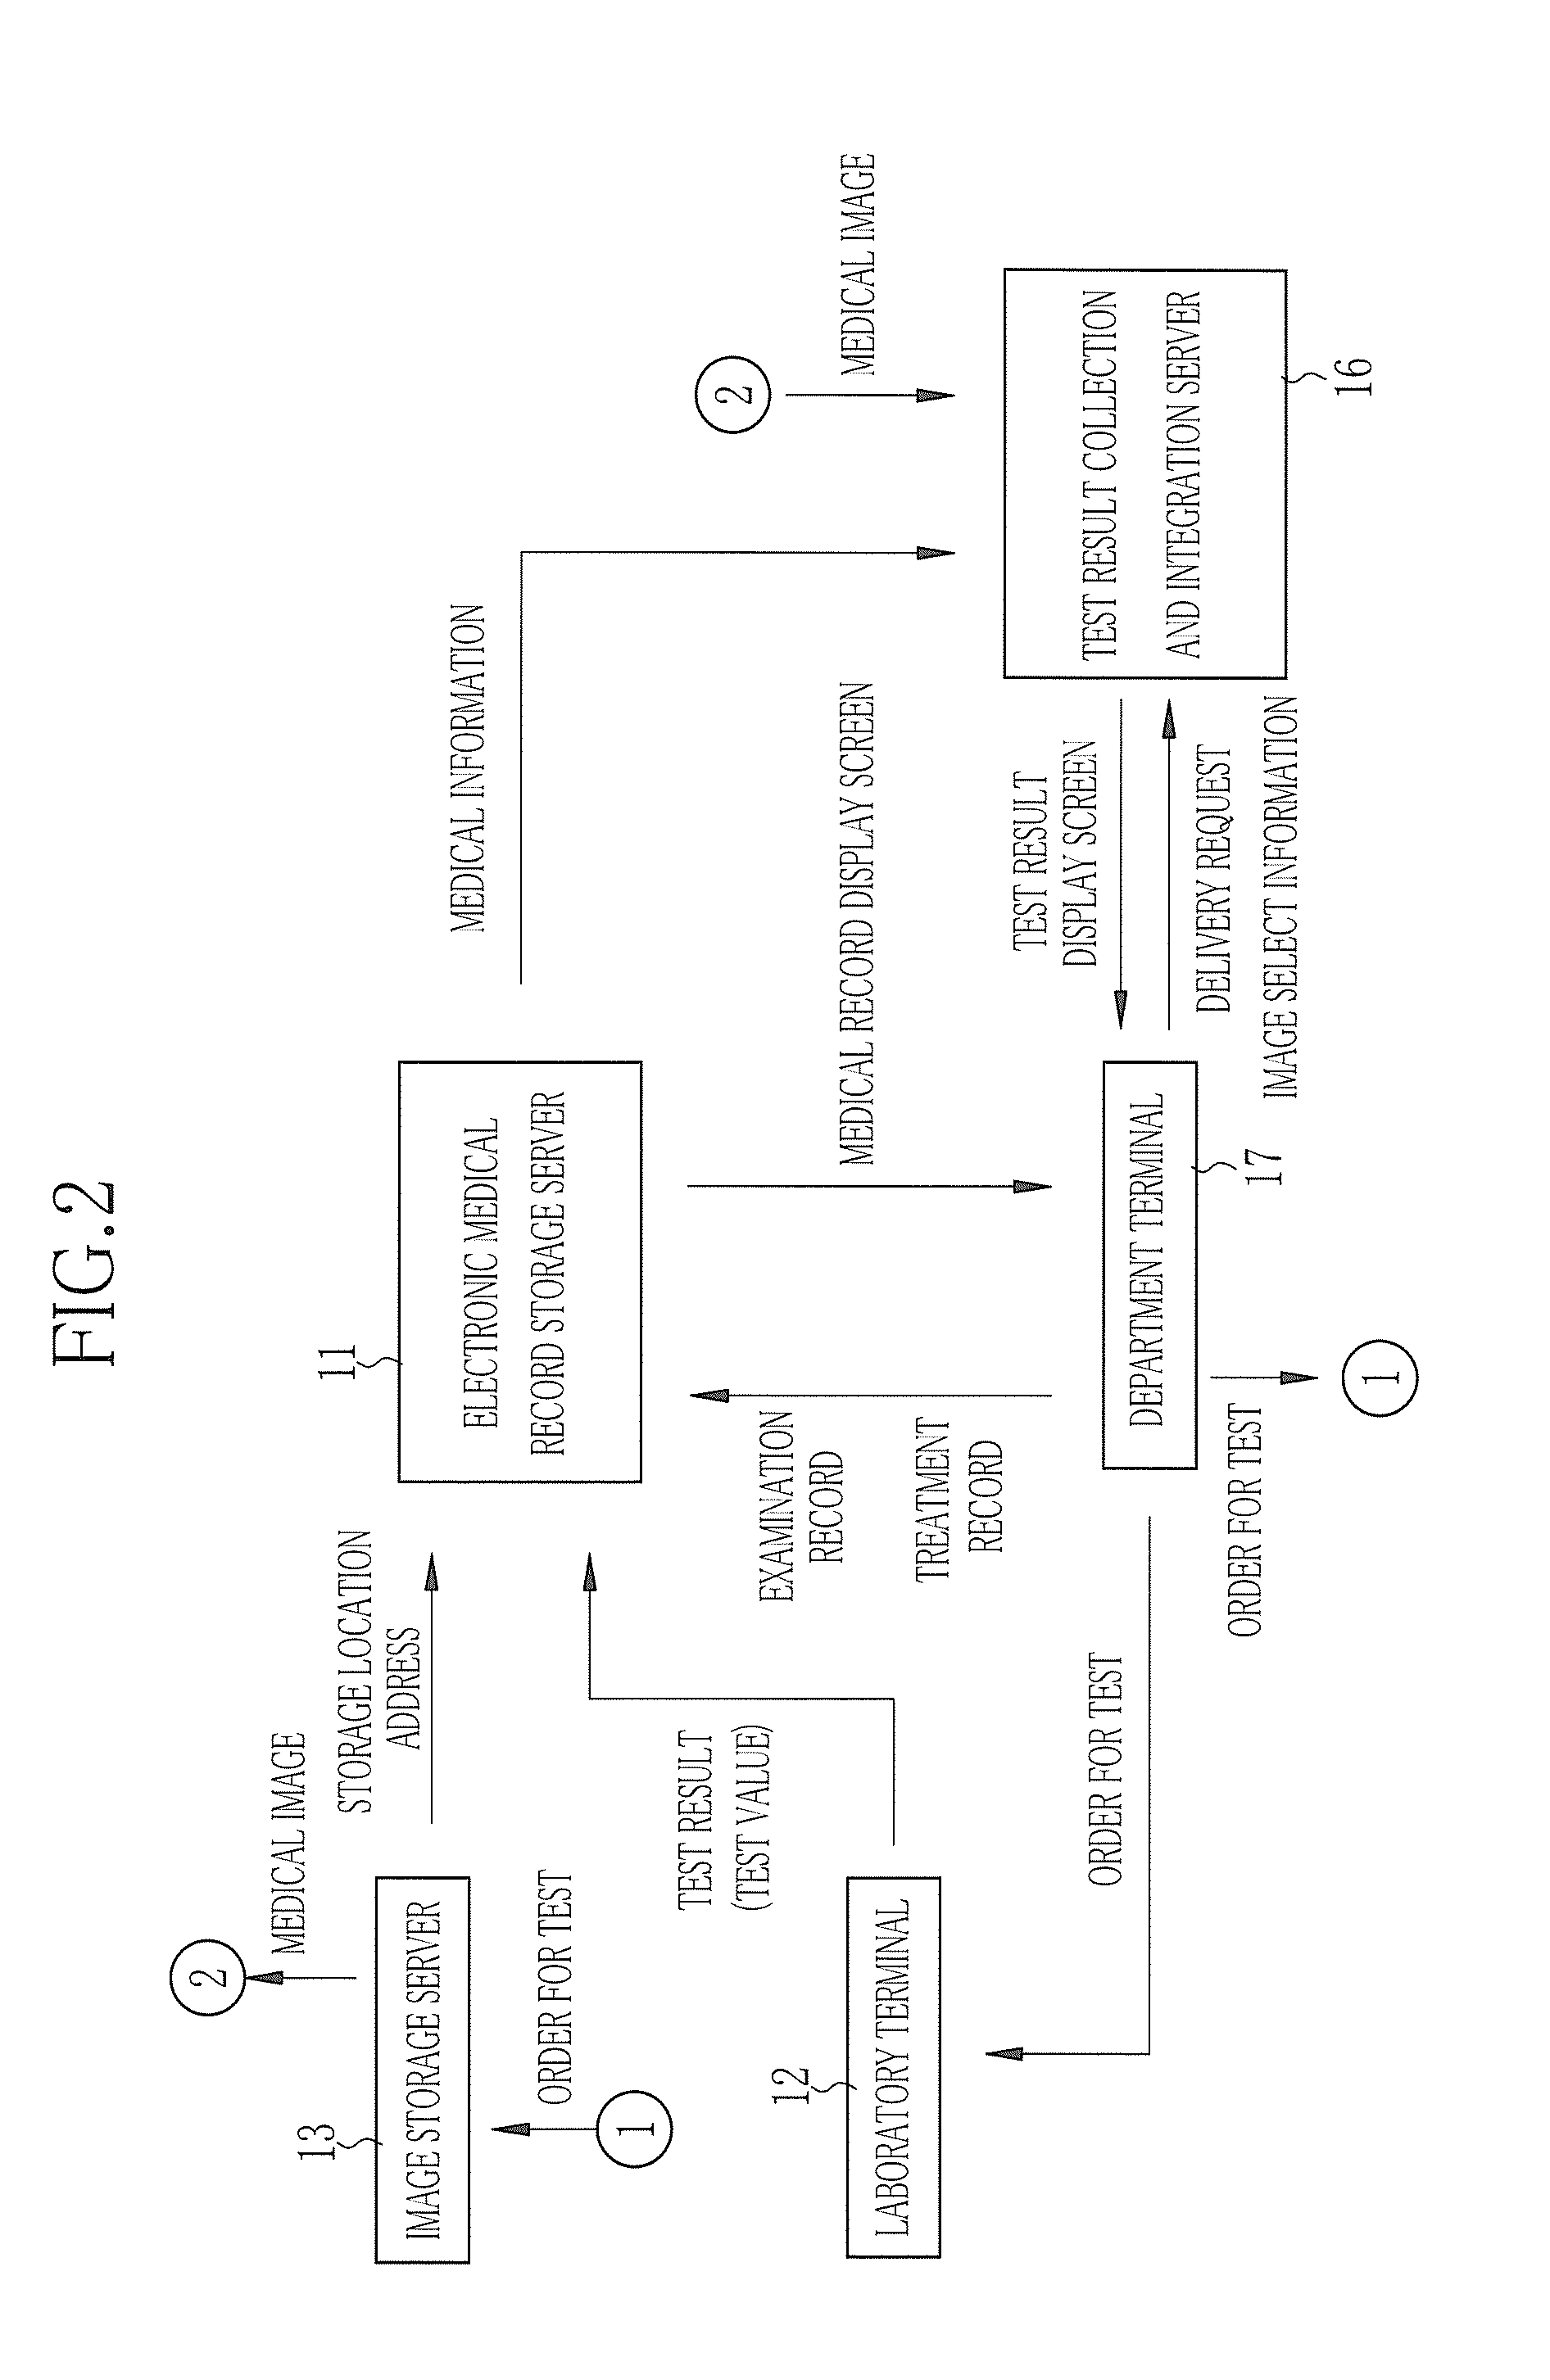 Medical test result display device and method for operating the same